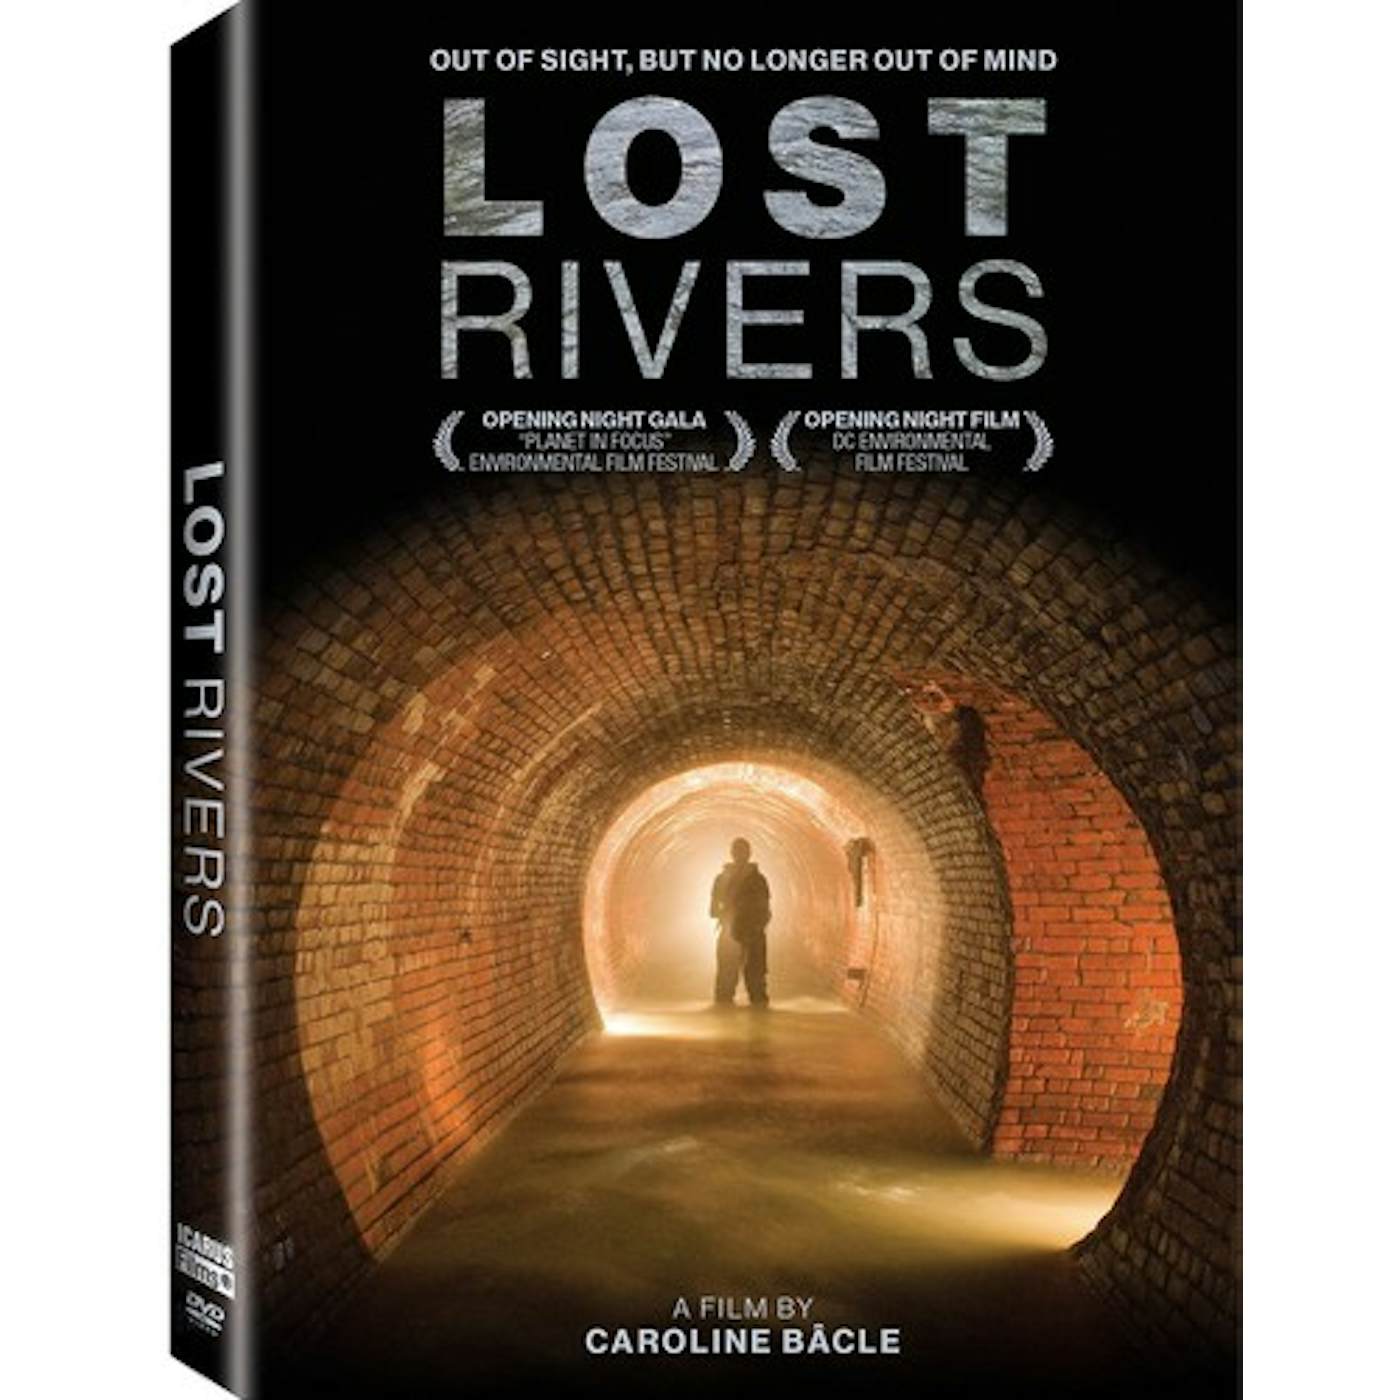 The Lost Rivers DVD